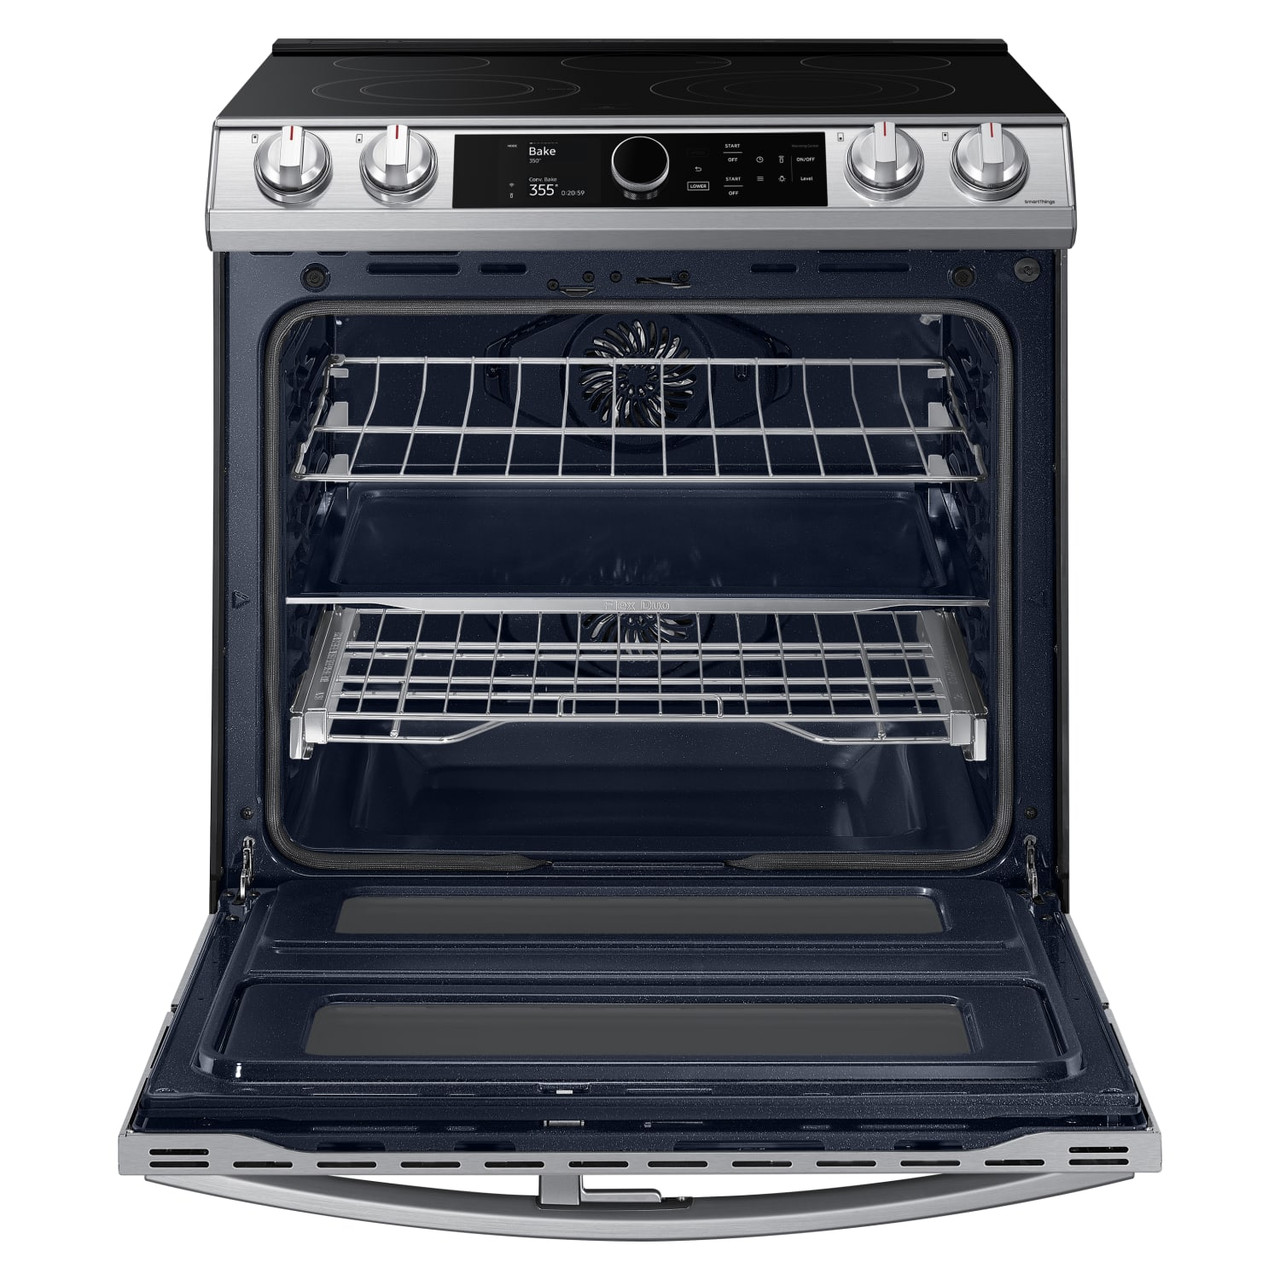 Samsung 6.3 cu. ft. Samsung Flex Duo Front Control Slide-in Electric Range with Smart Dial & Air Fry - Stainless Steel